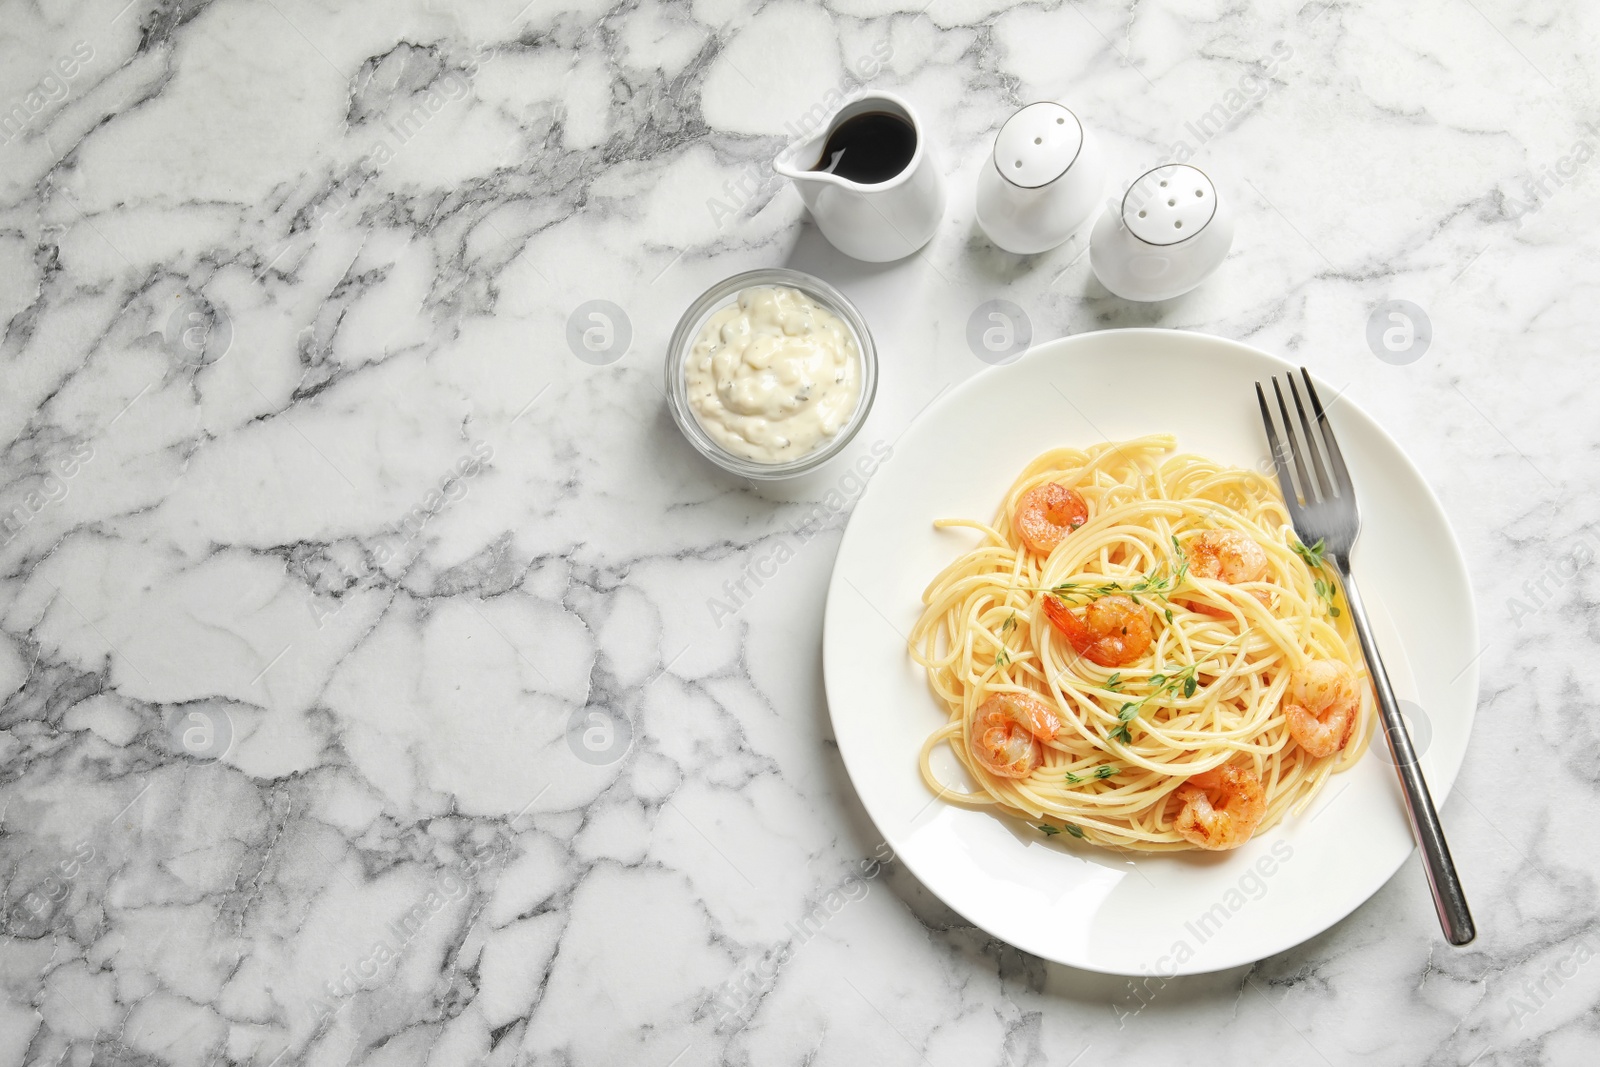 Photo of Plate with spaghetti and shrimps on light background, top view